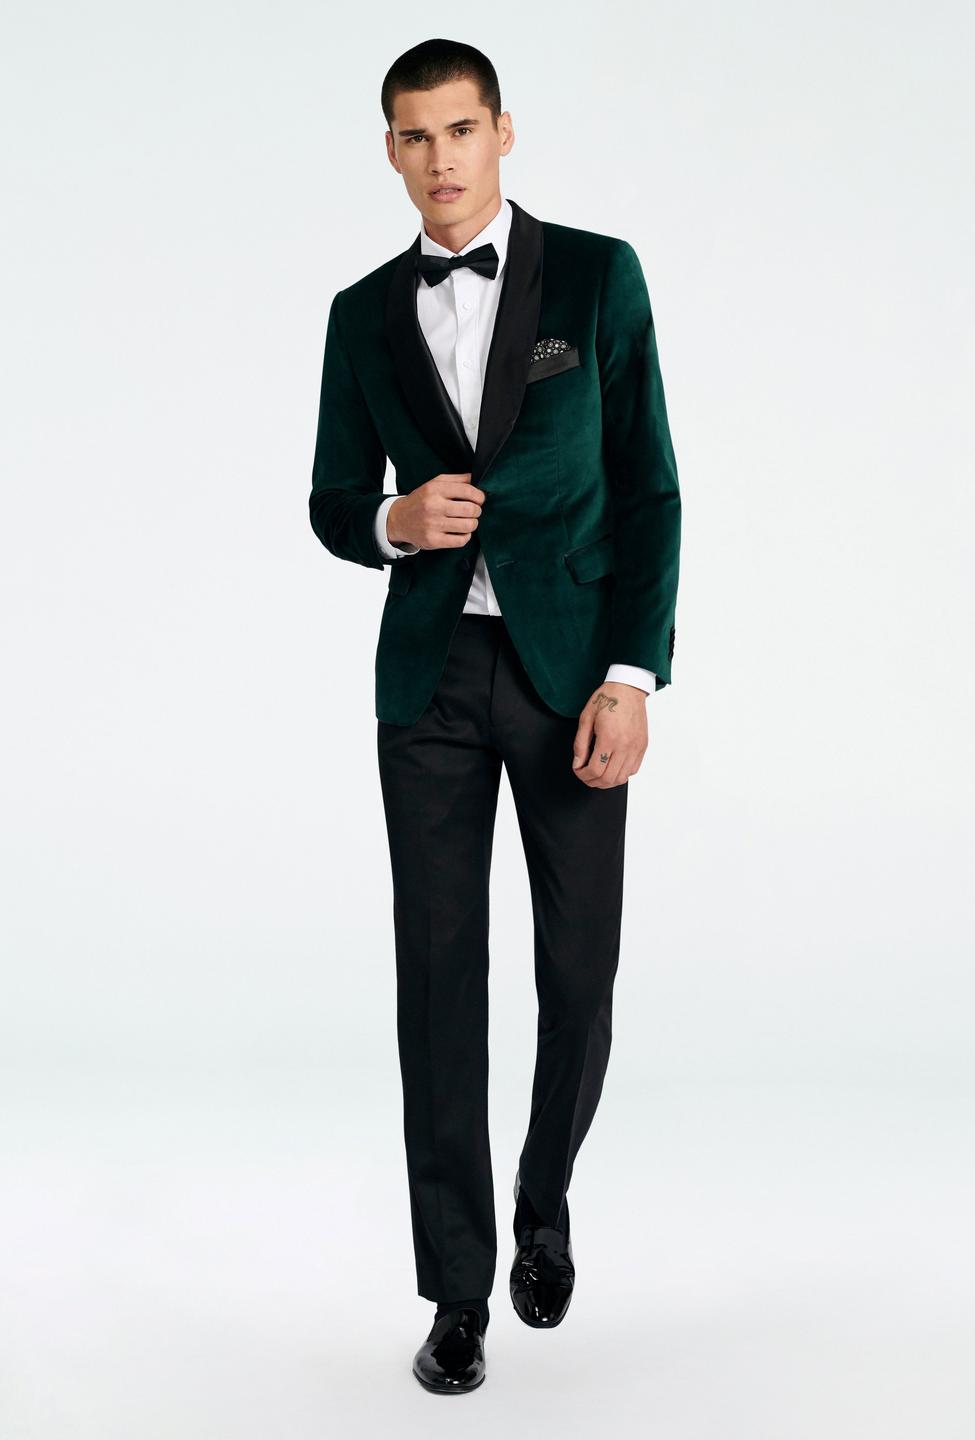 Green blazer - Harford Solid Design from Tuxedo Indochino Collection